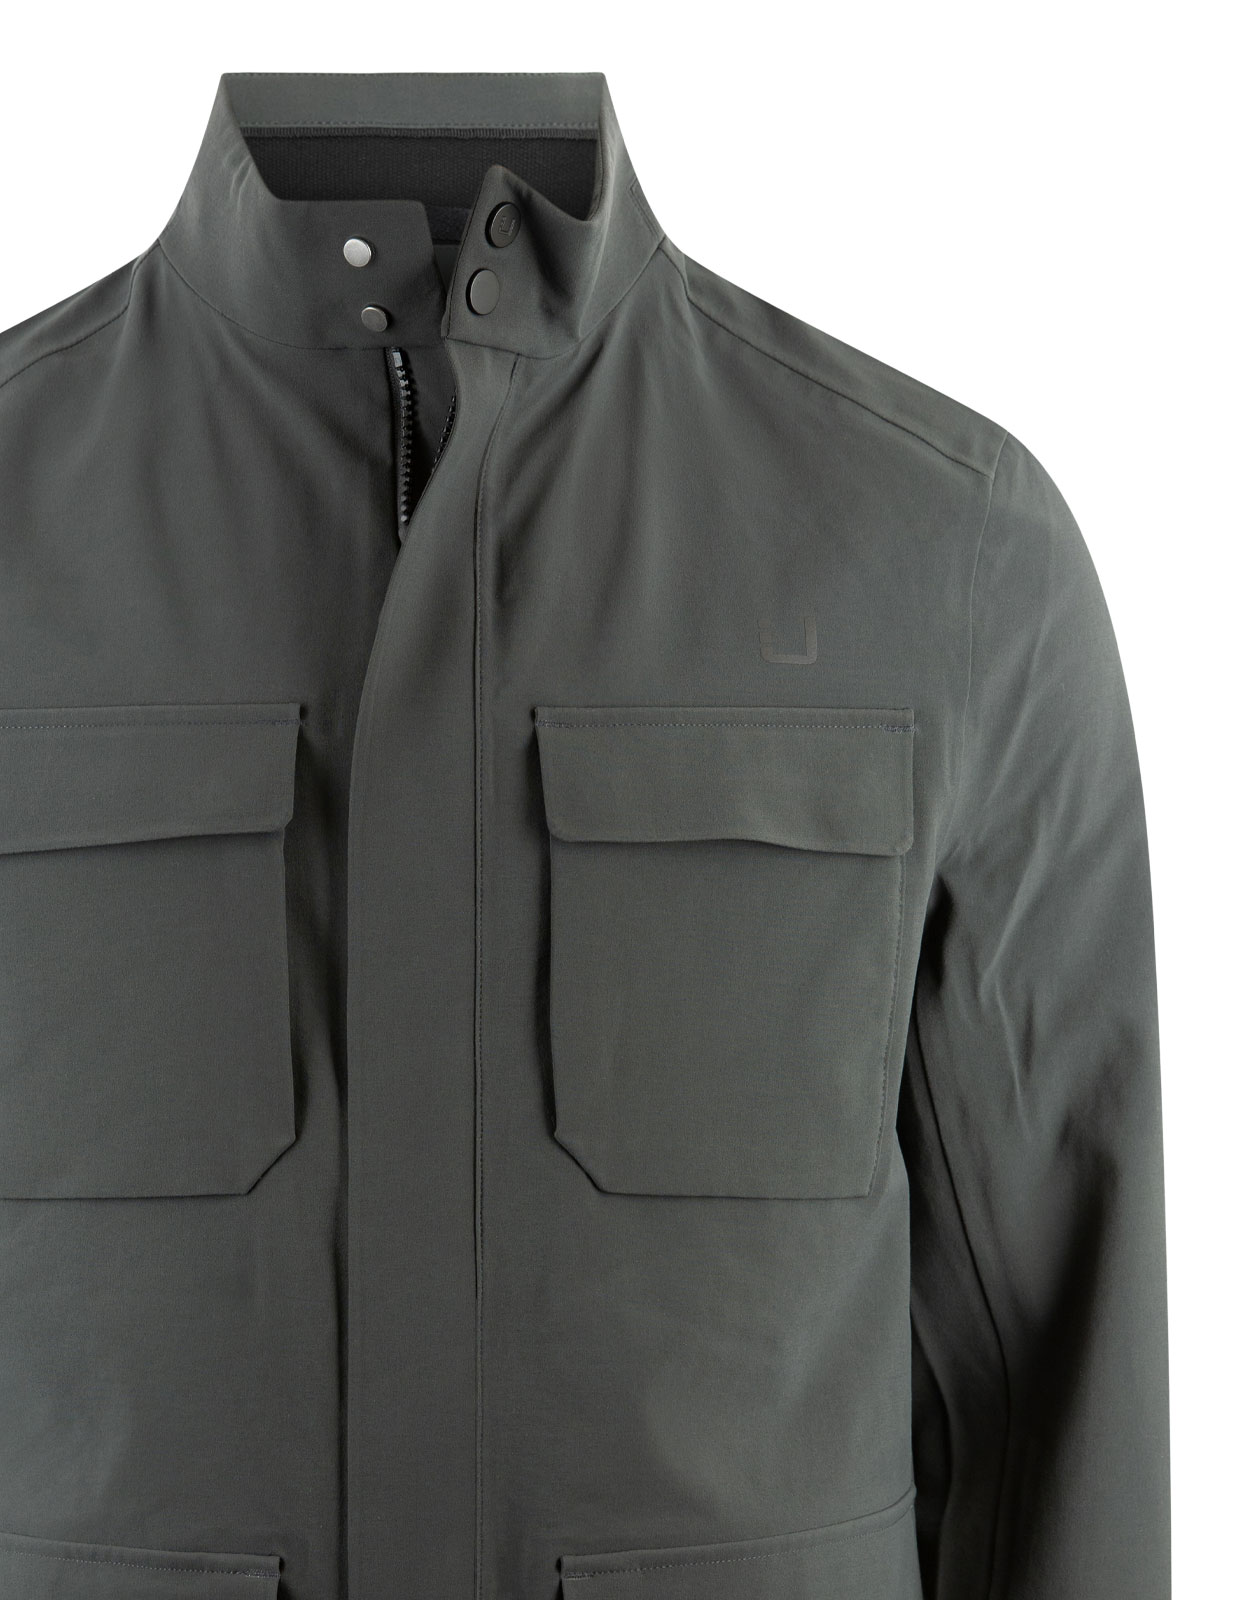 Charger Jacket Night Olive Stl M